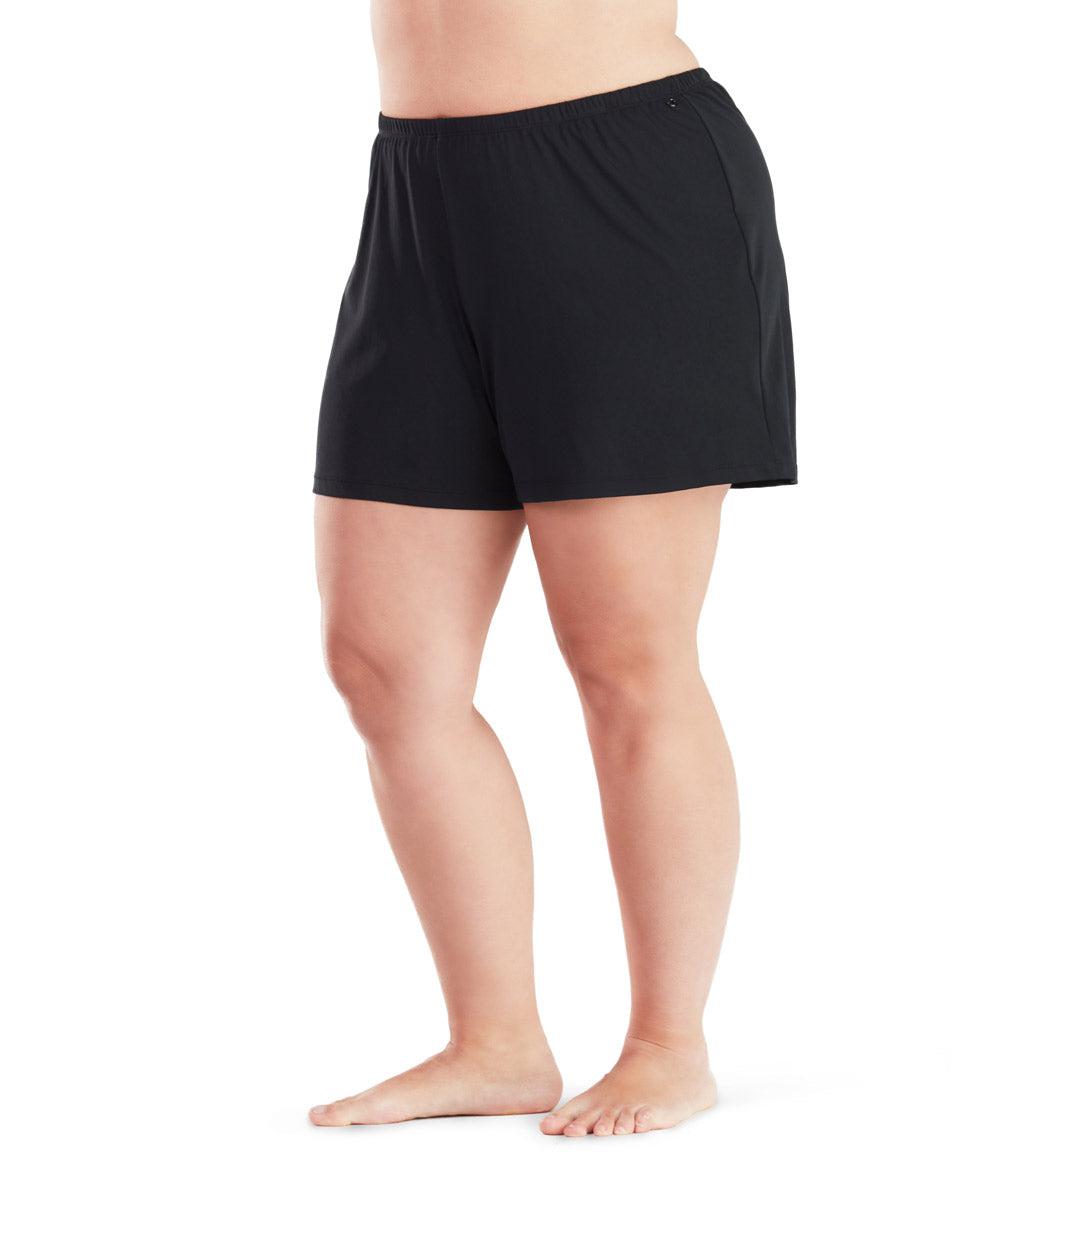 Plus size woman, facing front, wearing AquaSport Swim Short with Brief in solid black. Loose leg opening landing mid-thigh.